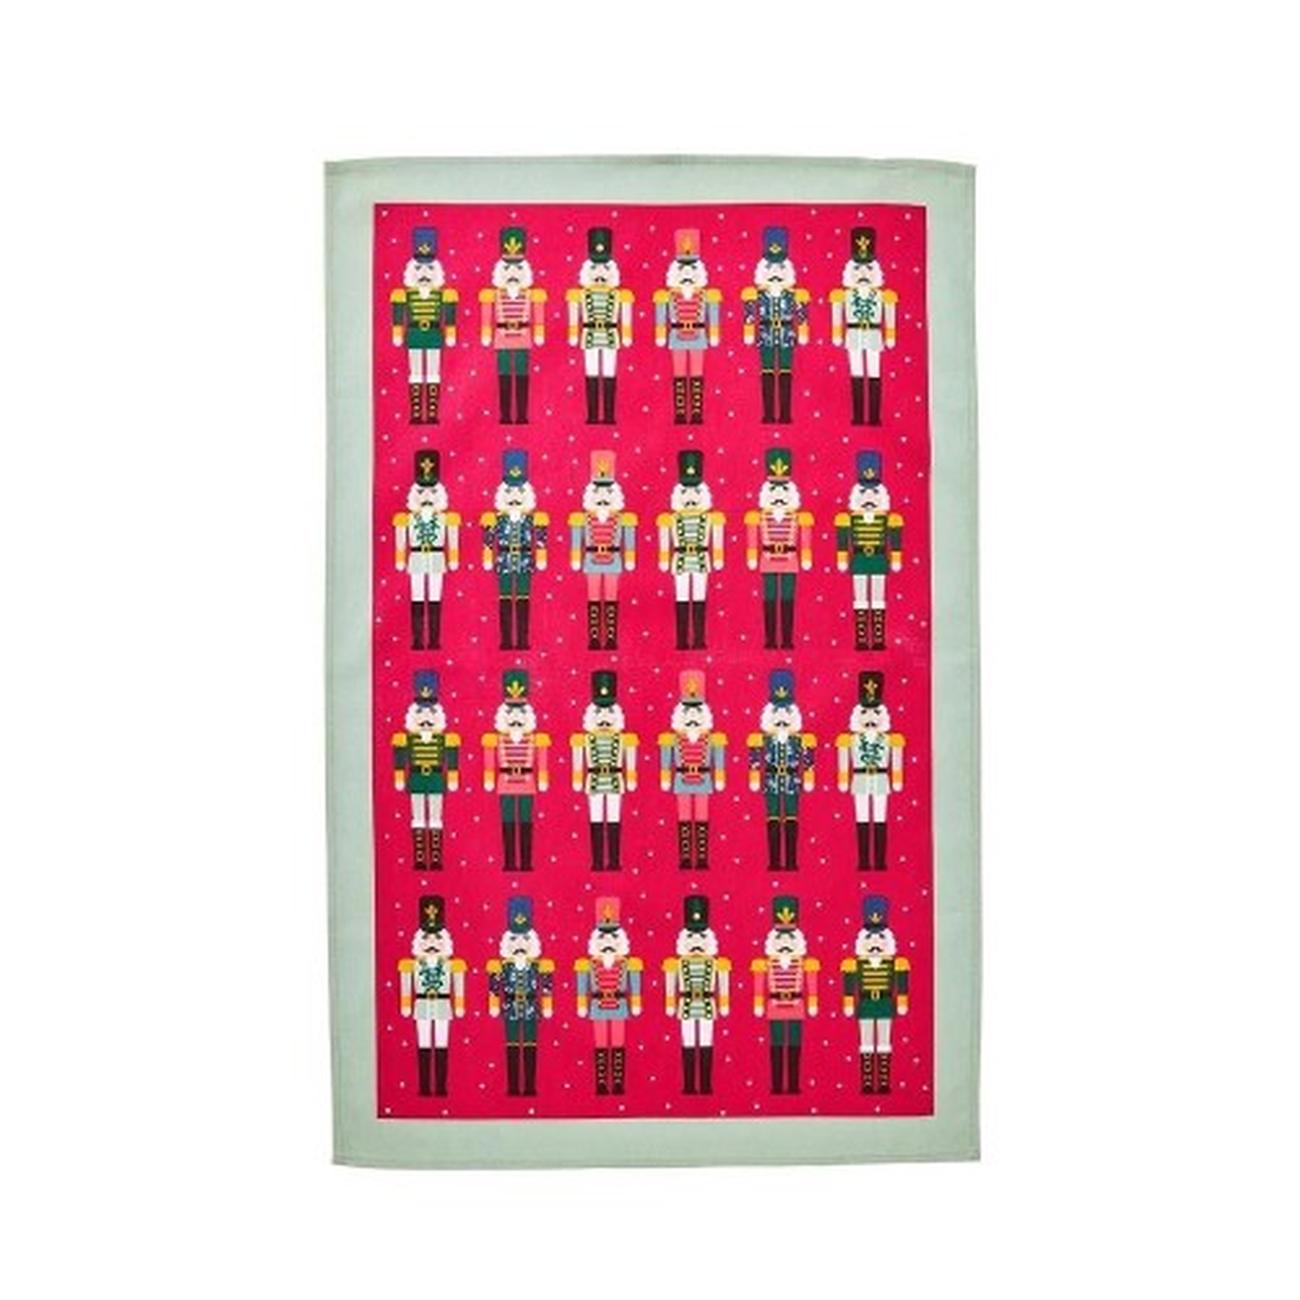 ulster-weavers-recycled-cotton-tea-towel-nutcracker-parade-Christmas - Ulster Weavers Nutcracker Parade Recycled Cotton Tea Towel